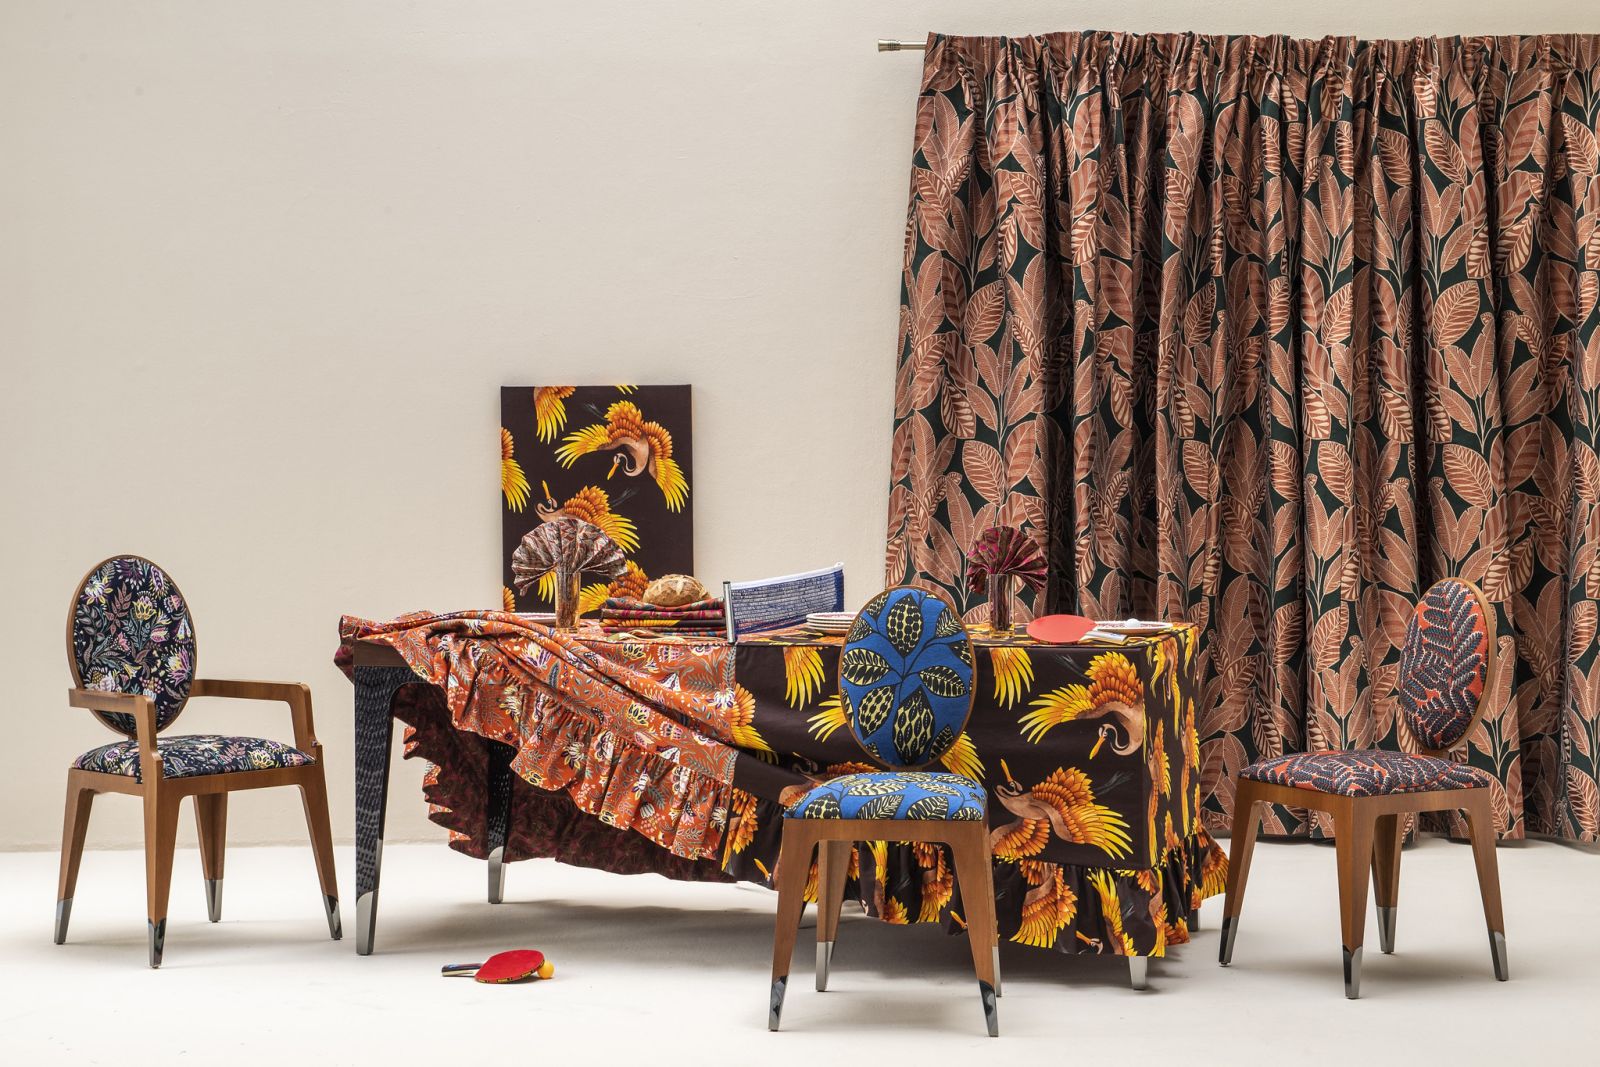 Zynna launches Thevenon’s exquisite blooming French fabrics in India